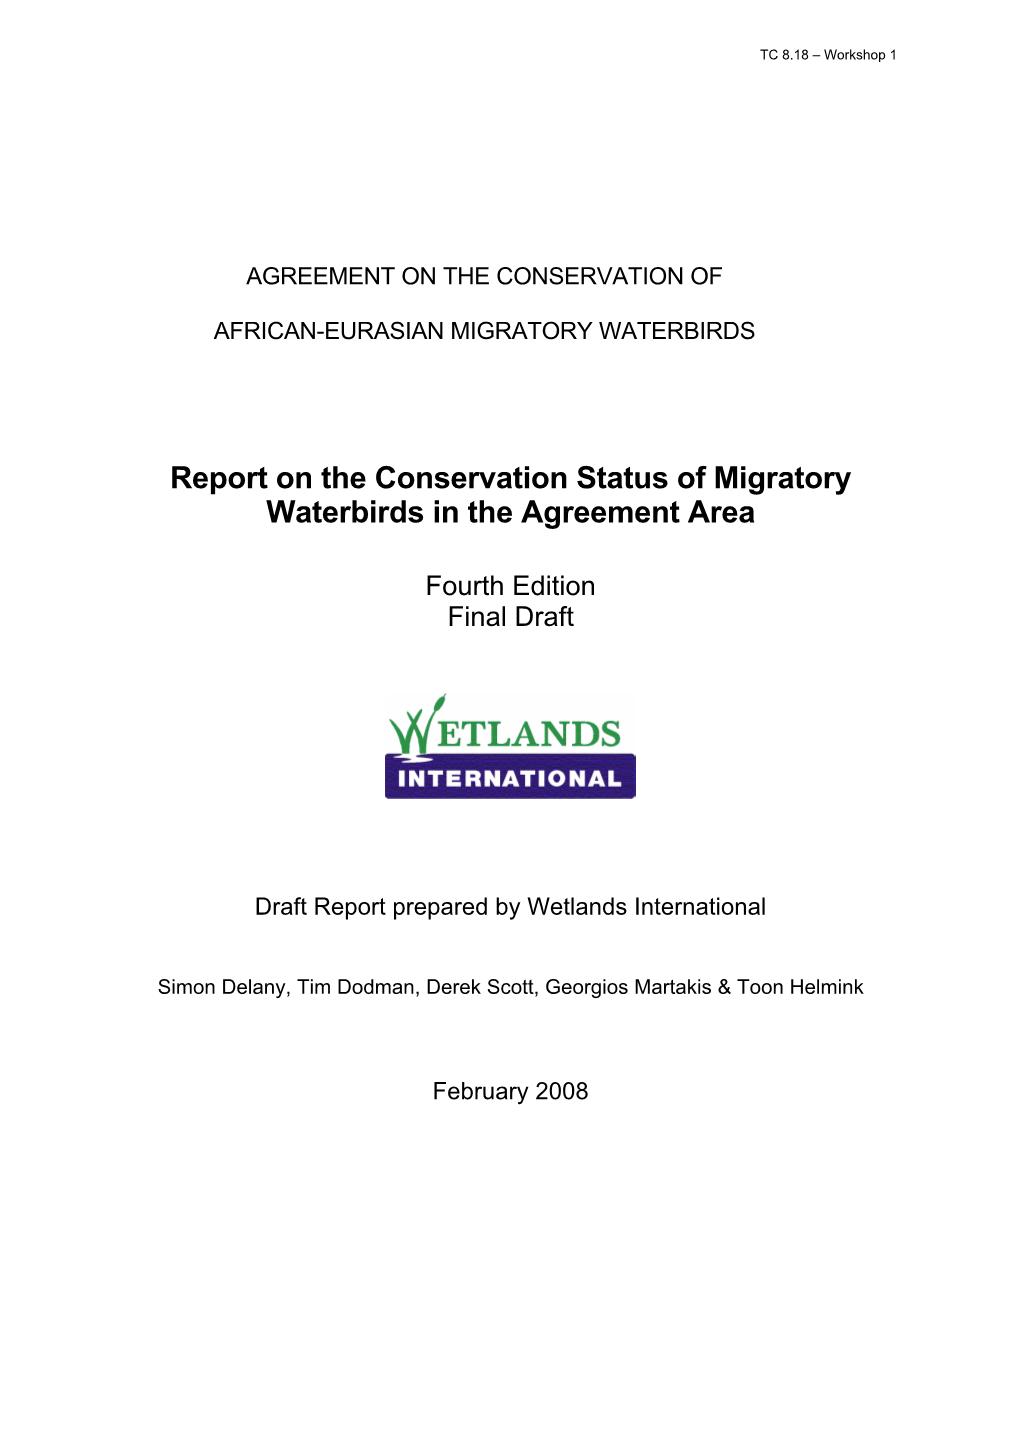 Report on the Conservation Status of Migratory Waterbirds in the Agreement Area